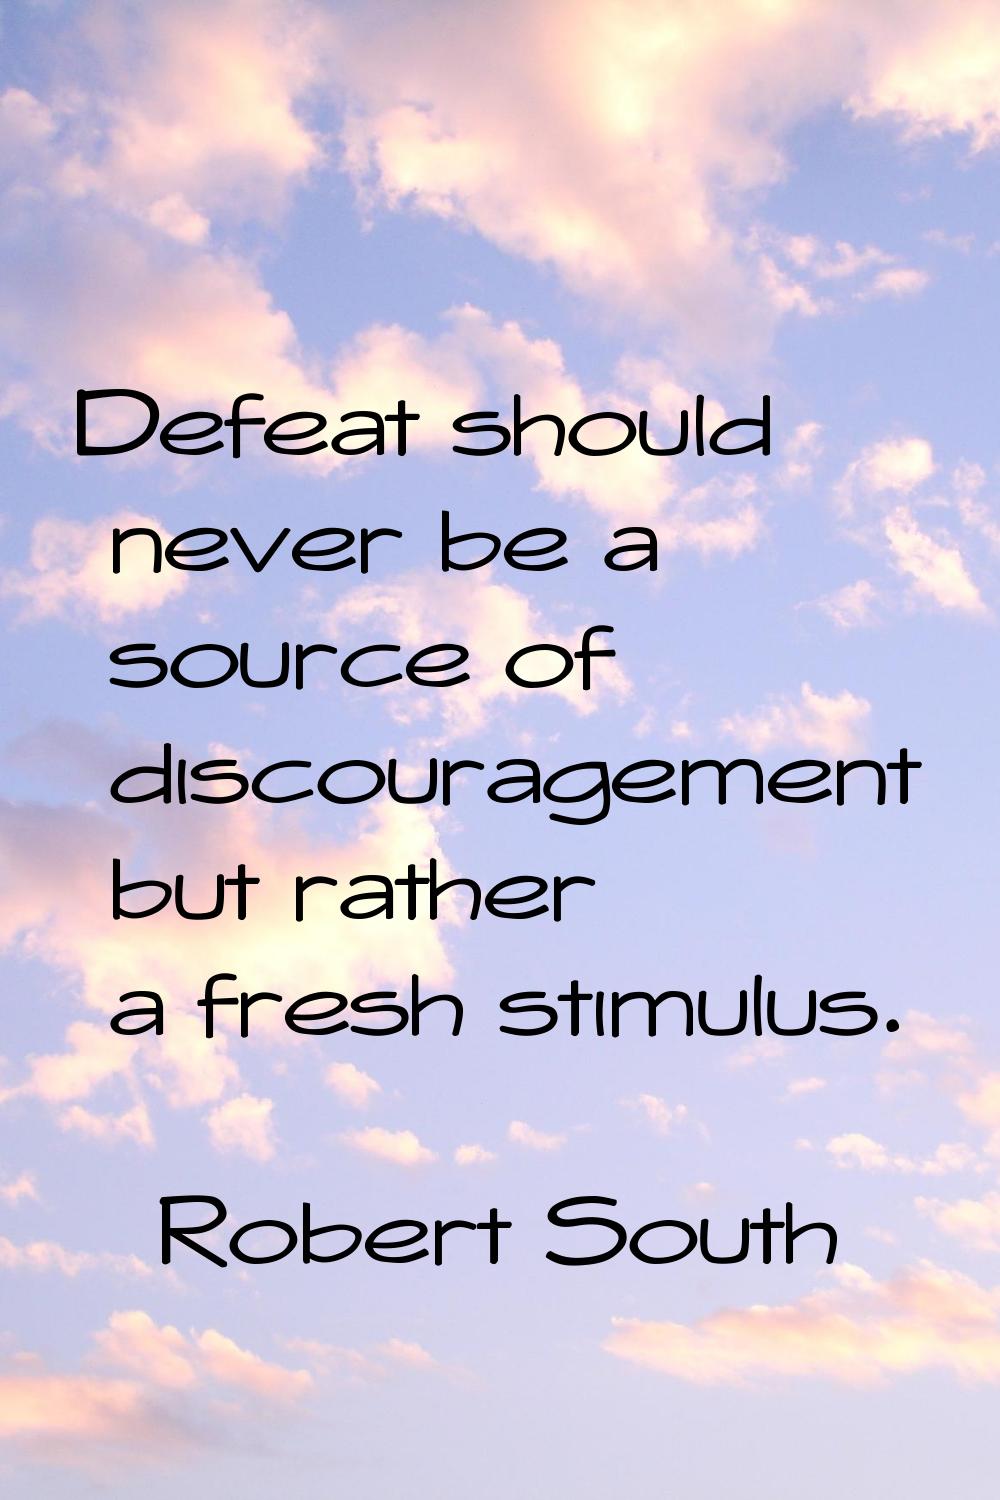 Defeat should never be a source of discouragement but rather a fresh stimulus.